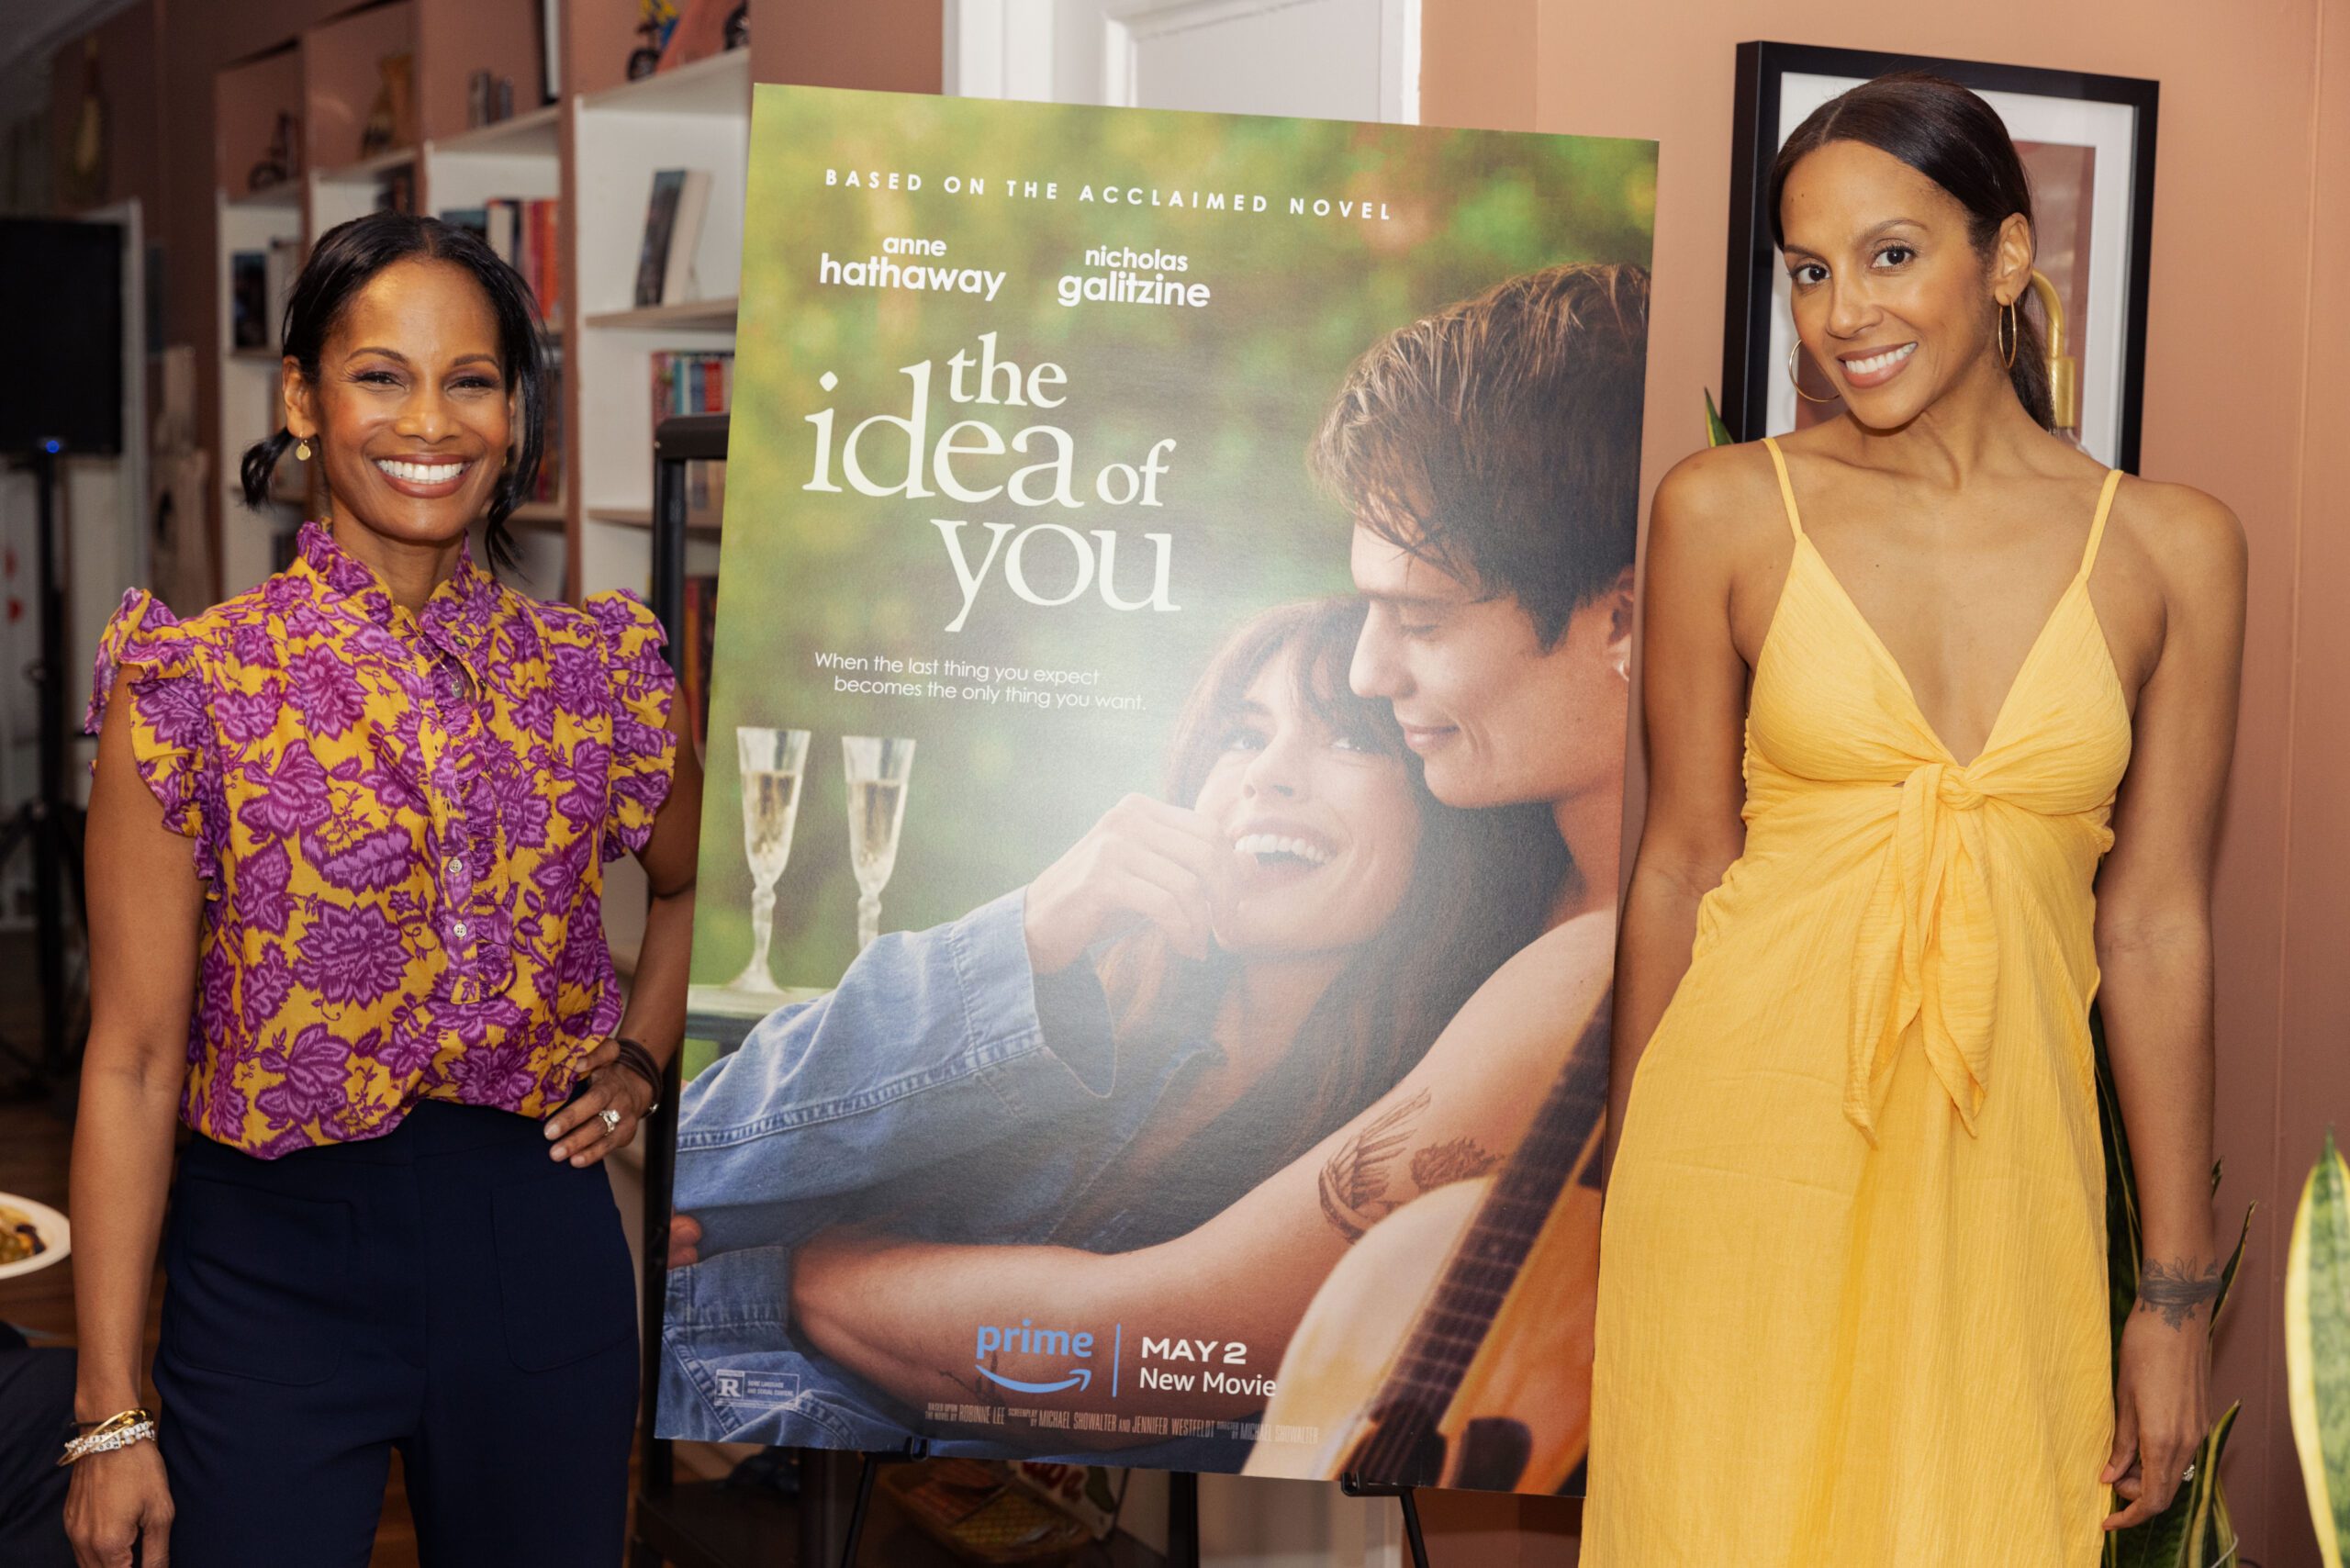 lm adaptation of Robinne Lee’s novel “The Idea of You,” Comes to Prime Video